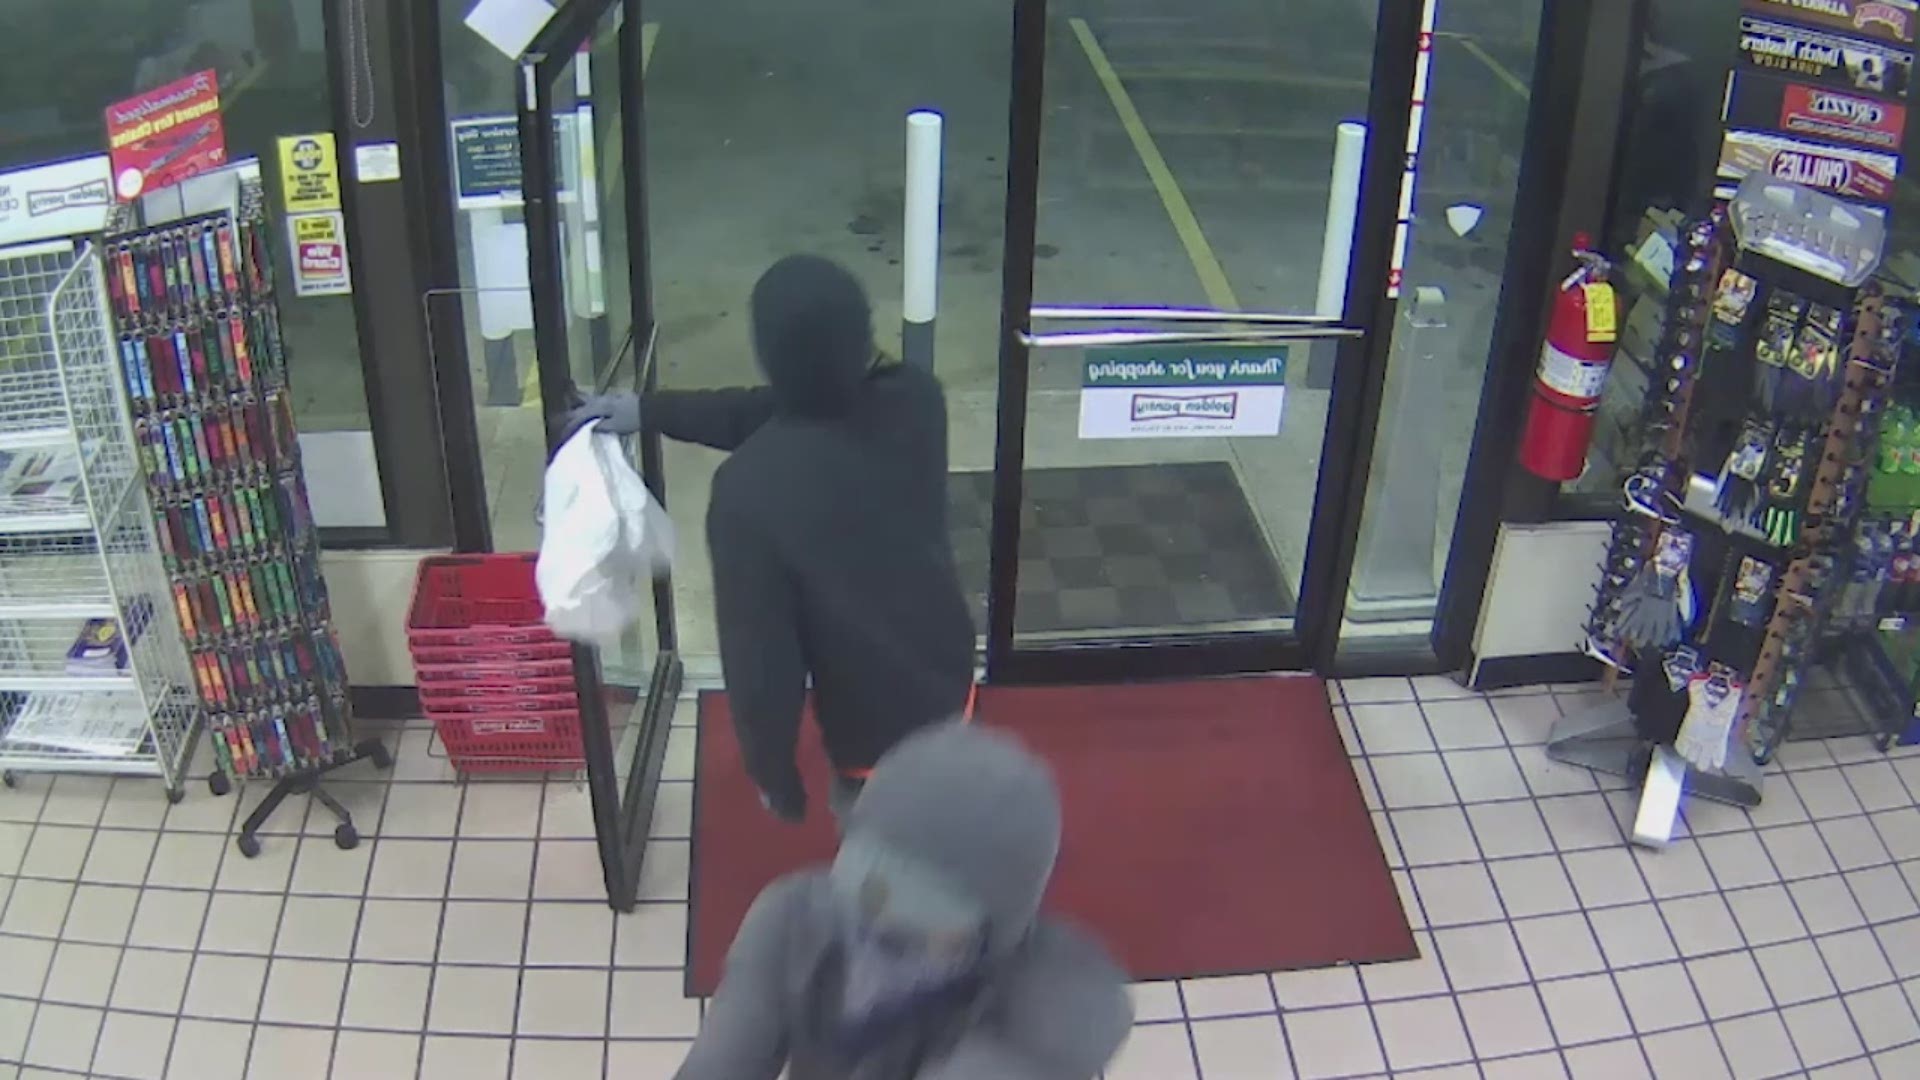 Three armed robbery suspects are clearly seen on surveillance video from an early morning heist at a convenience store in Athens early Tuesday morning. All three have bandannas over their faces and are wearing hoodies.